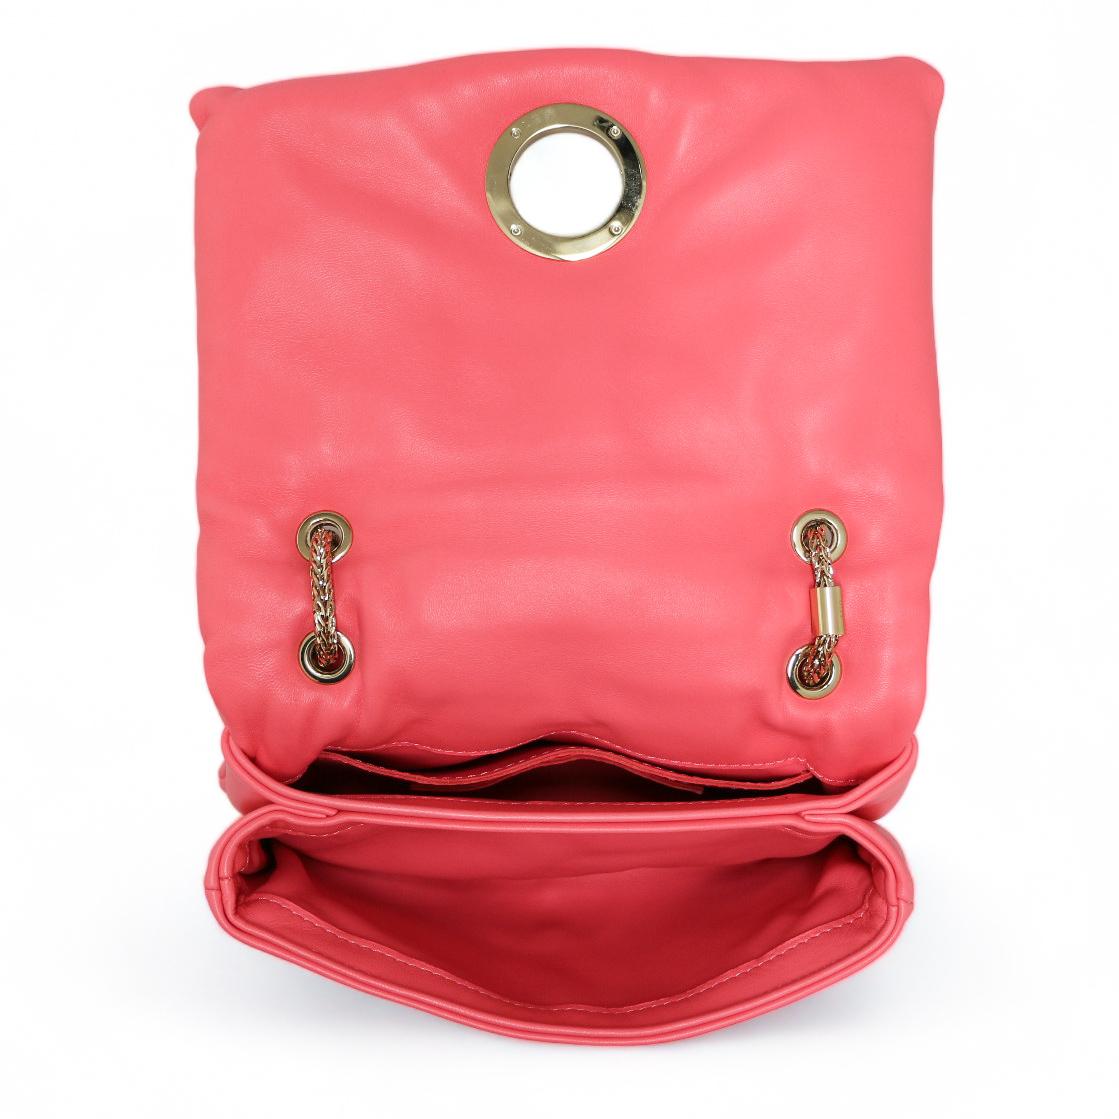 Coral Leather Airbag Bag GIAMBATISTA VALLI For Sale 4